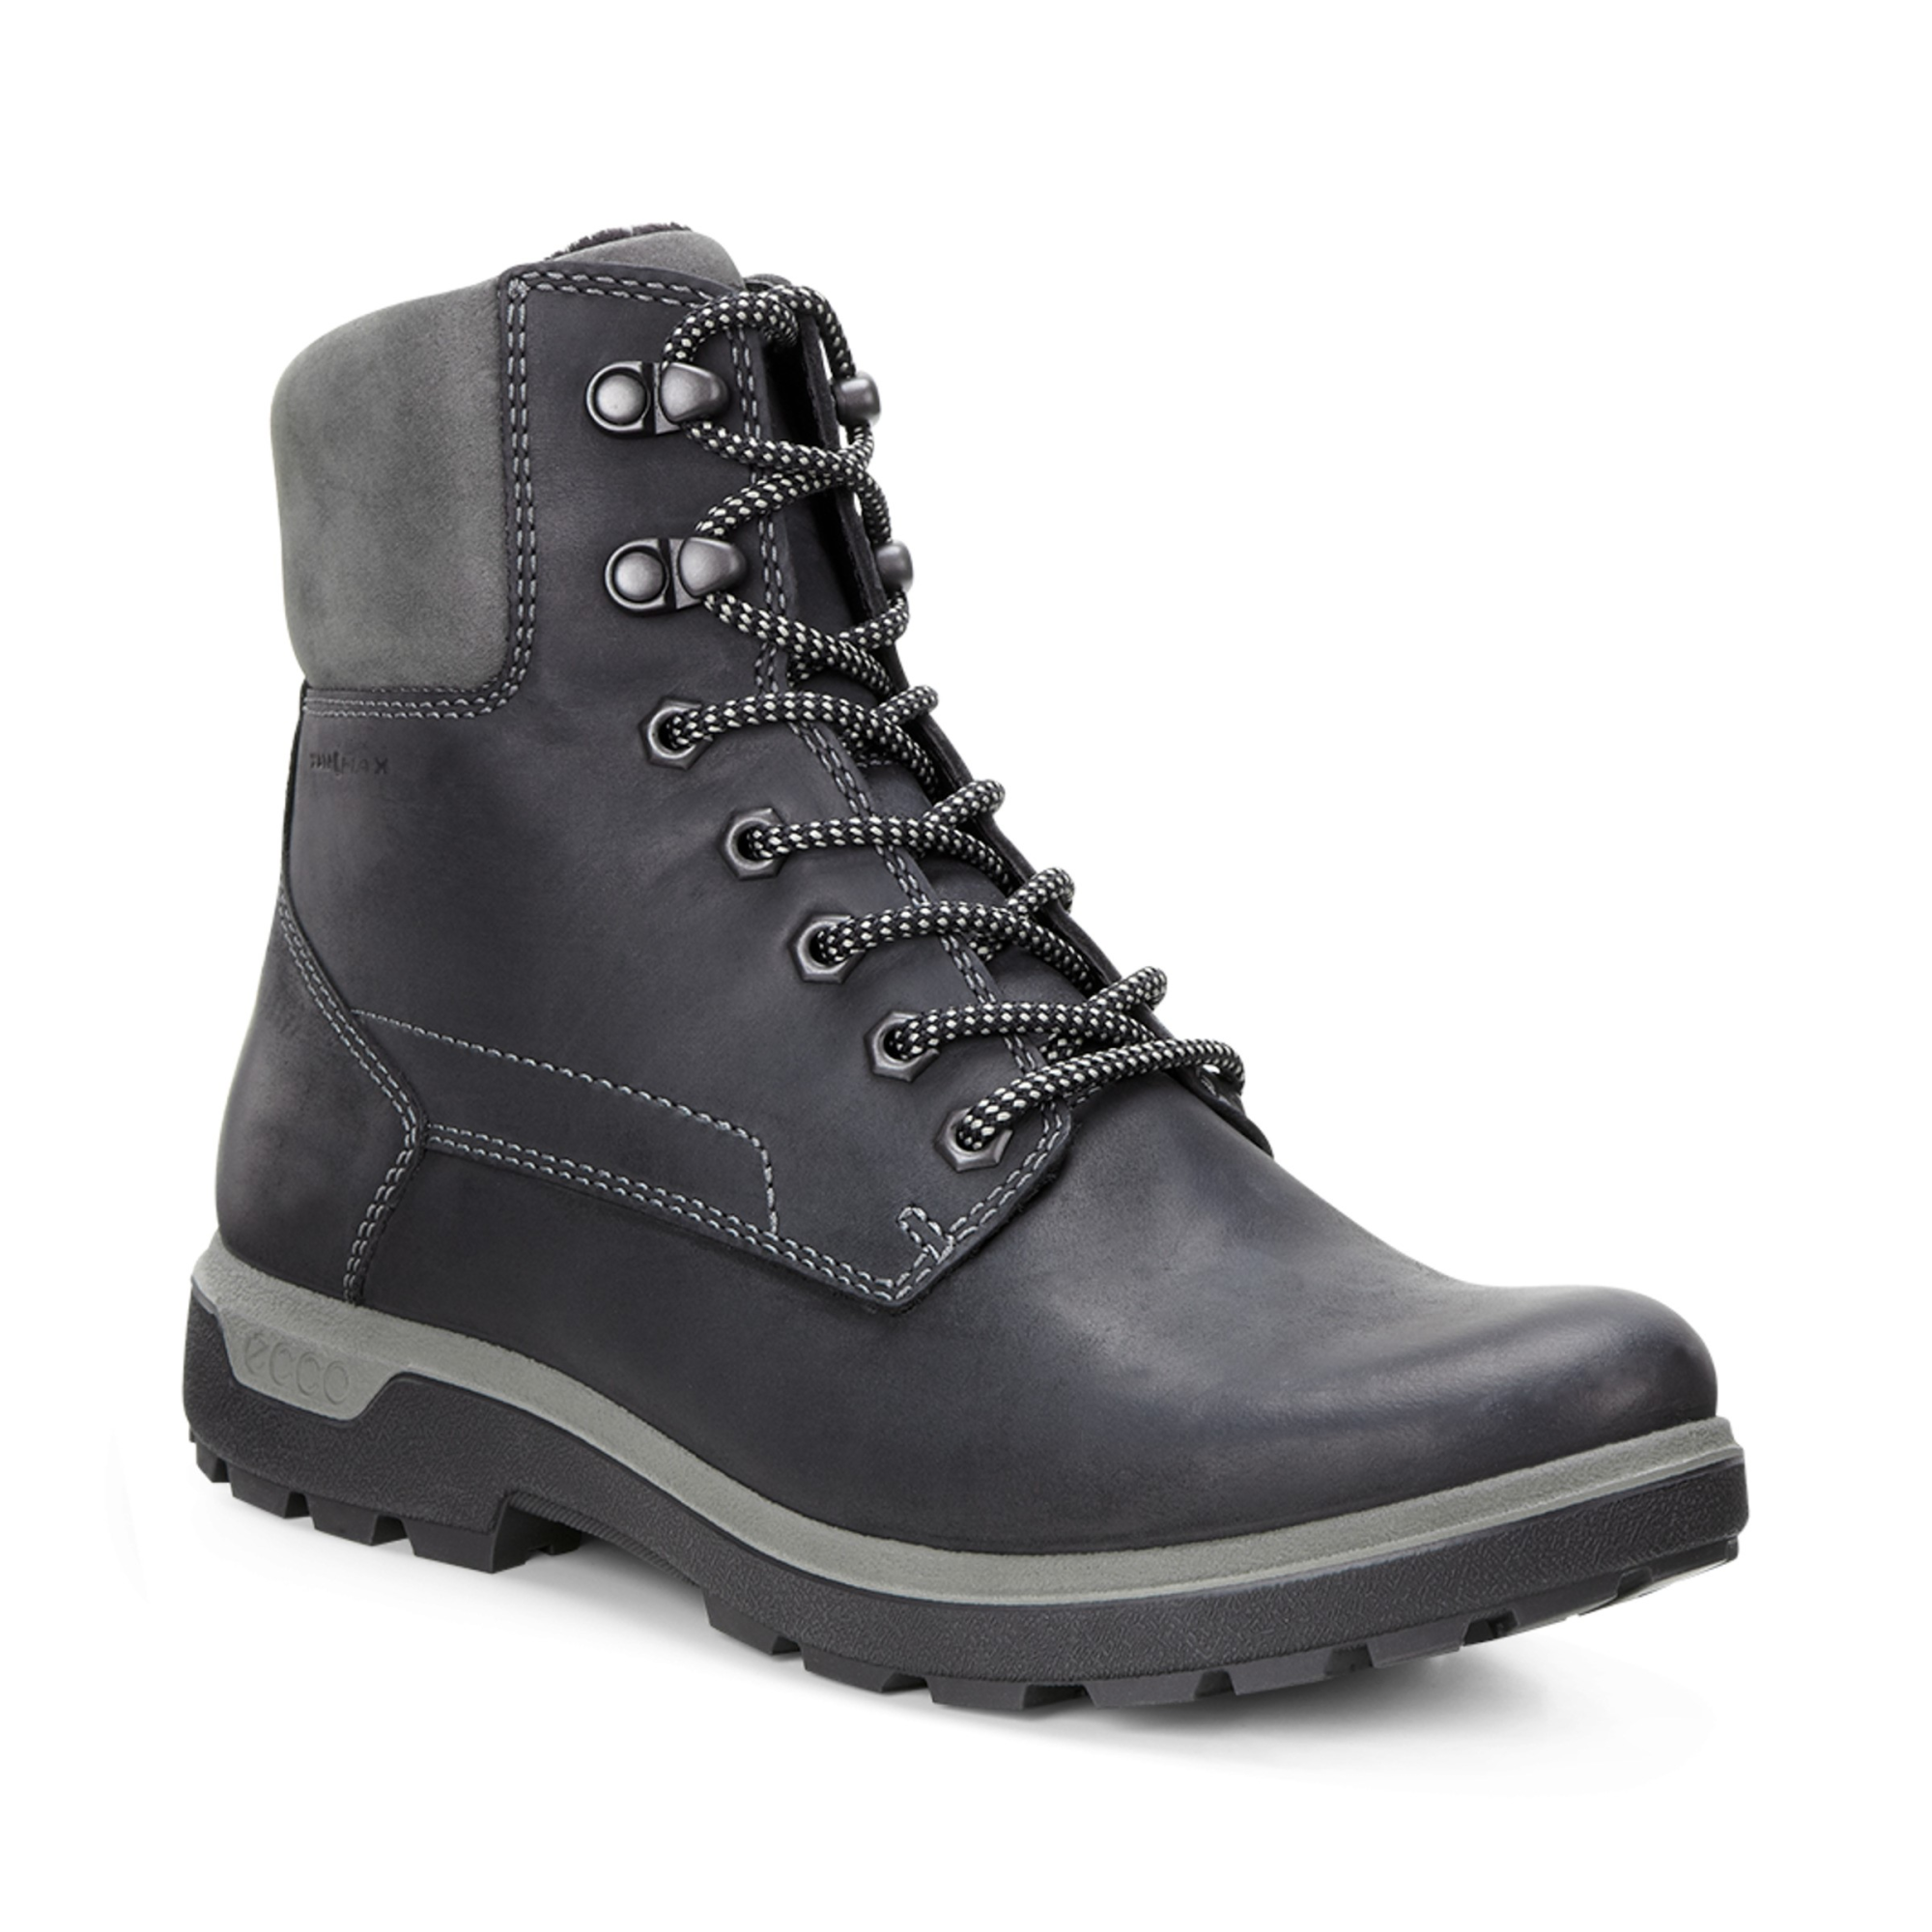 Ecco Gora Boot 41 - Products - Mall - Veryk many product, quick safe your money!